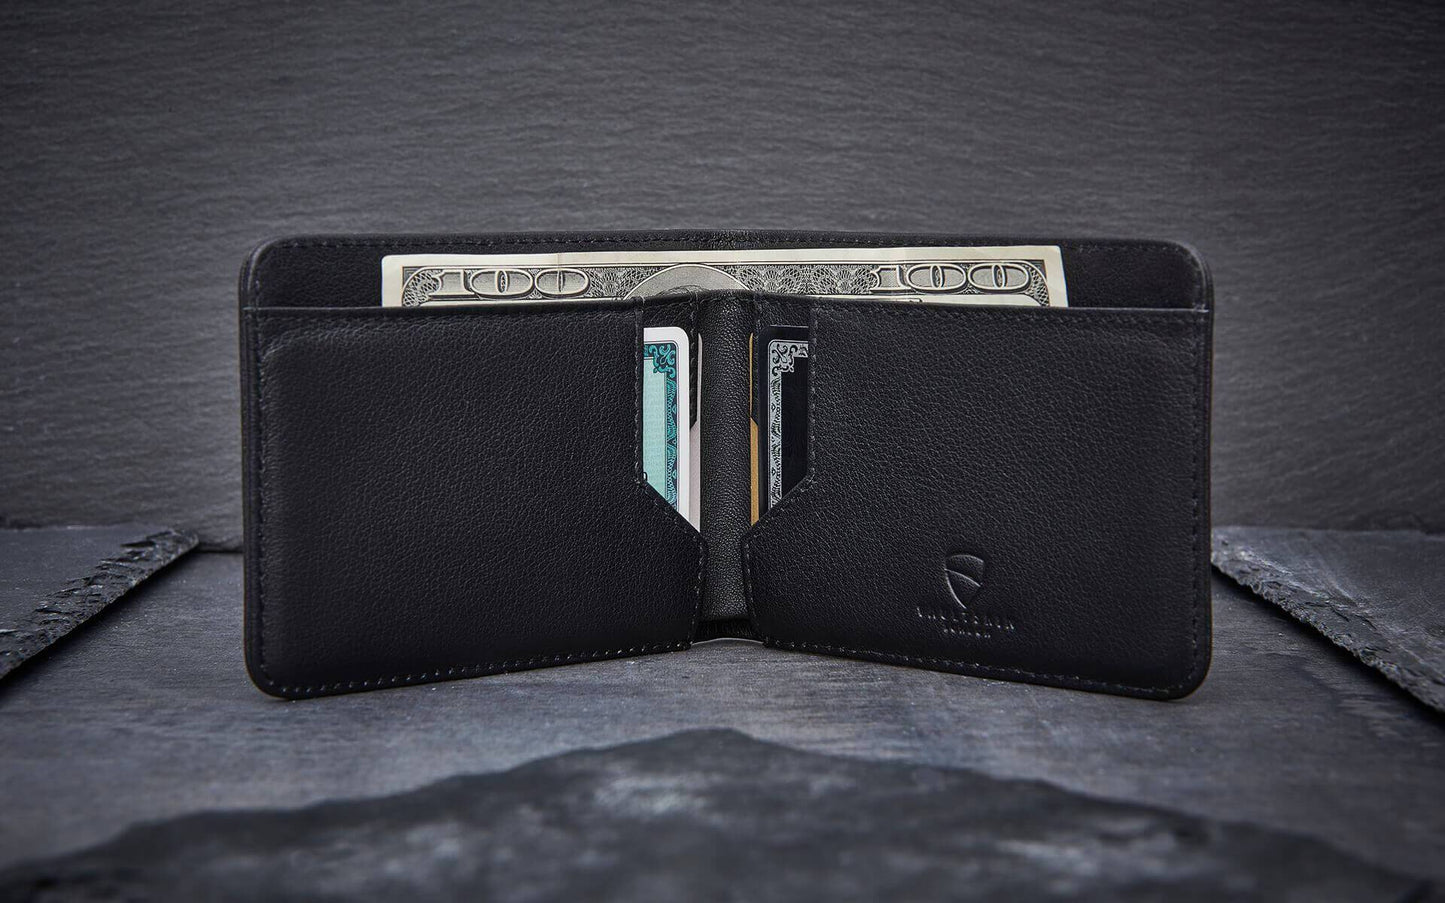 Easy to carry ID wallet for active lifestyle